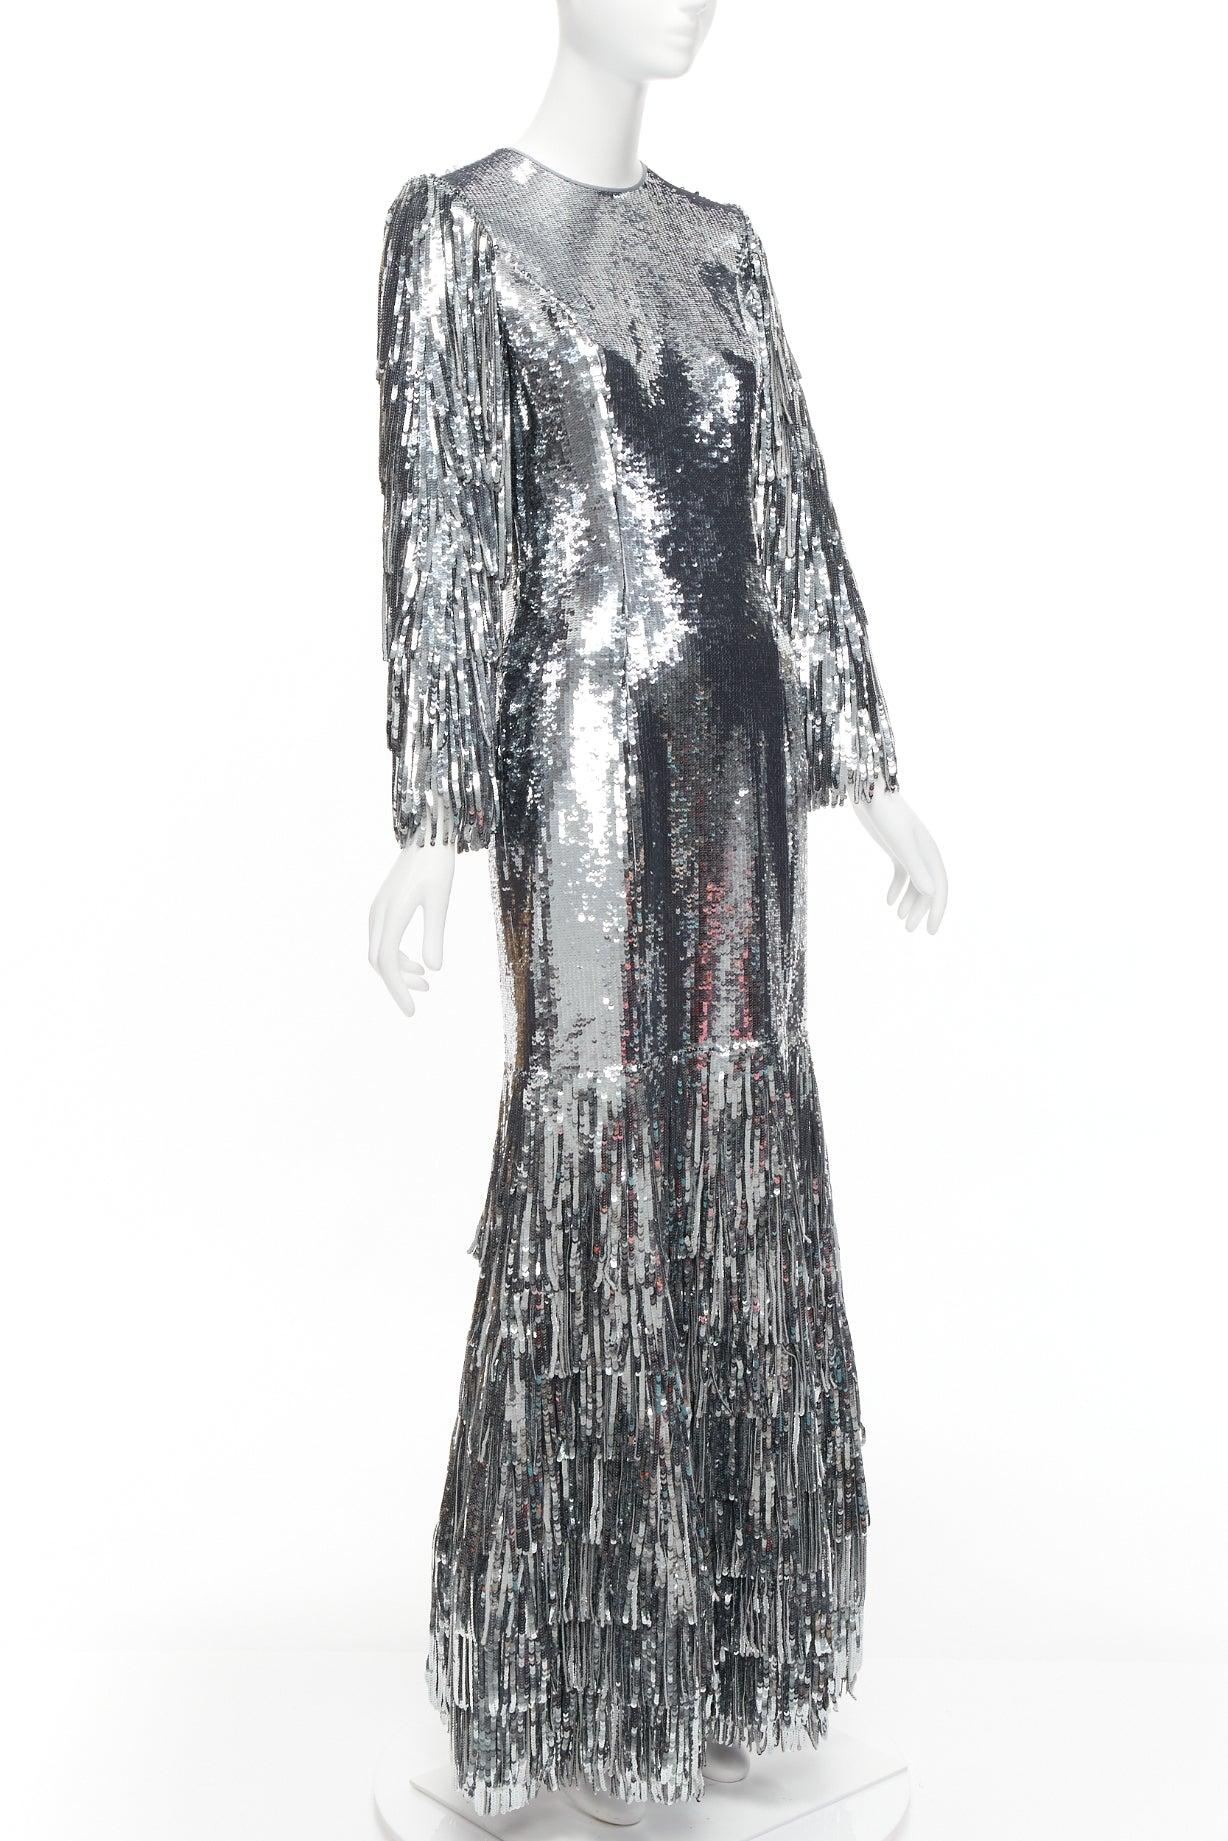 HUISHAN ZHANG silver sequins fringe detail silk lined mermaid gown dress UK6 XS
Reference: AAWC/A00703
Brand: Huishan Zhang
Material: Polyester
Color: Silver
Pattern: Sequins
Closure: Zip
Lining: White Silk
Extra Details: Back zip closure.
Made in: